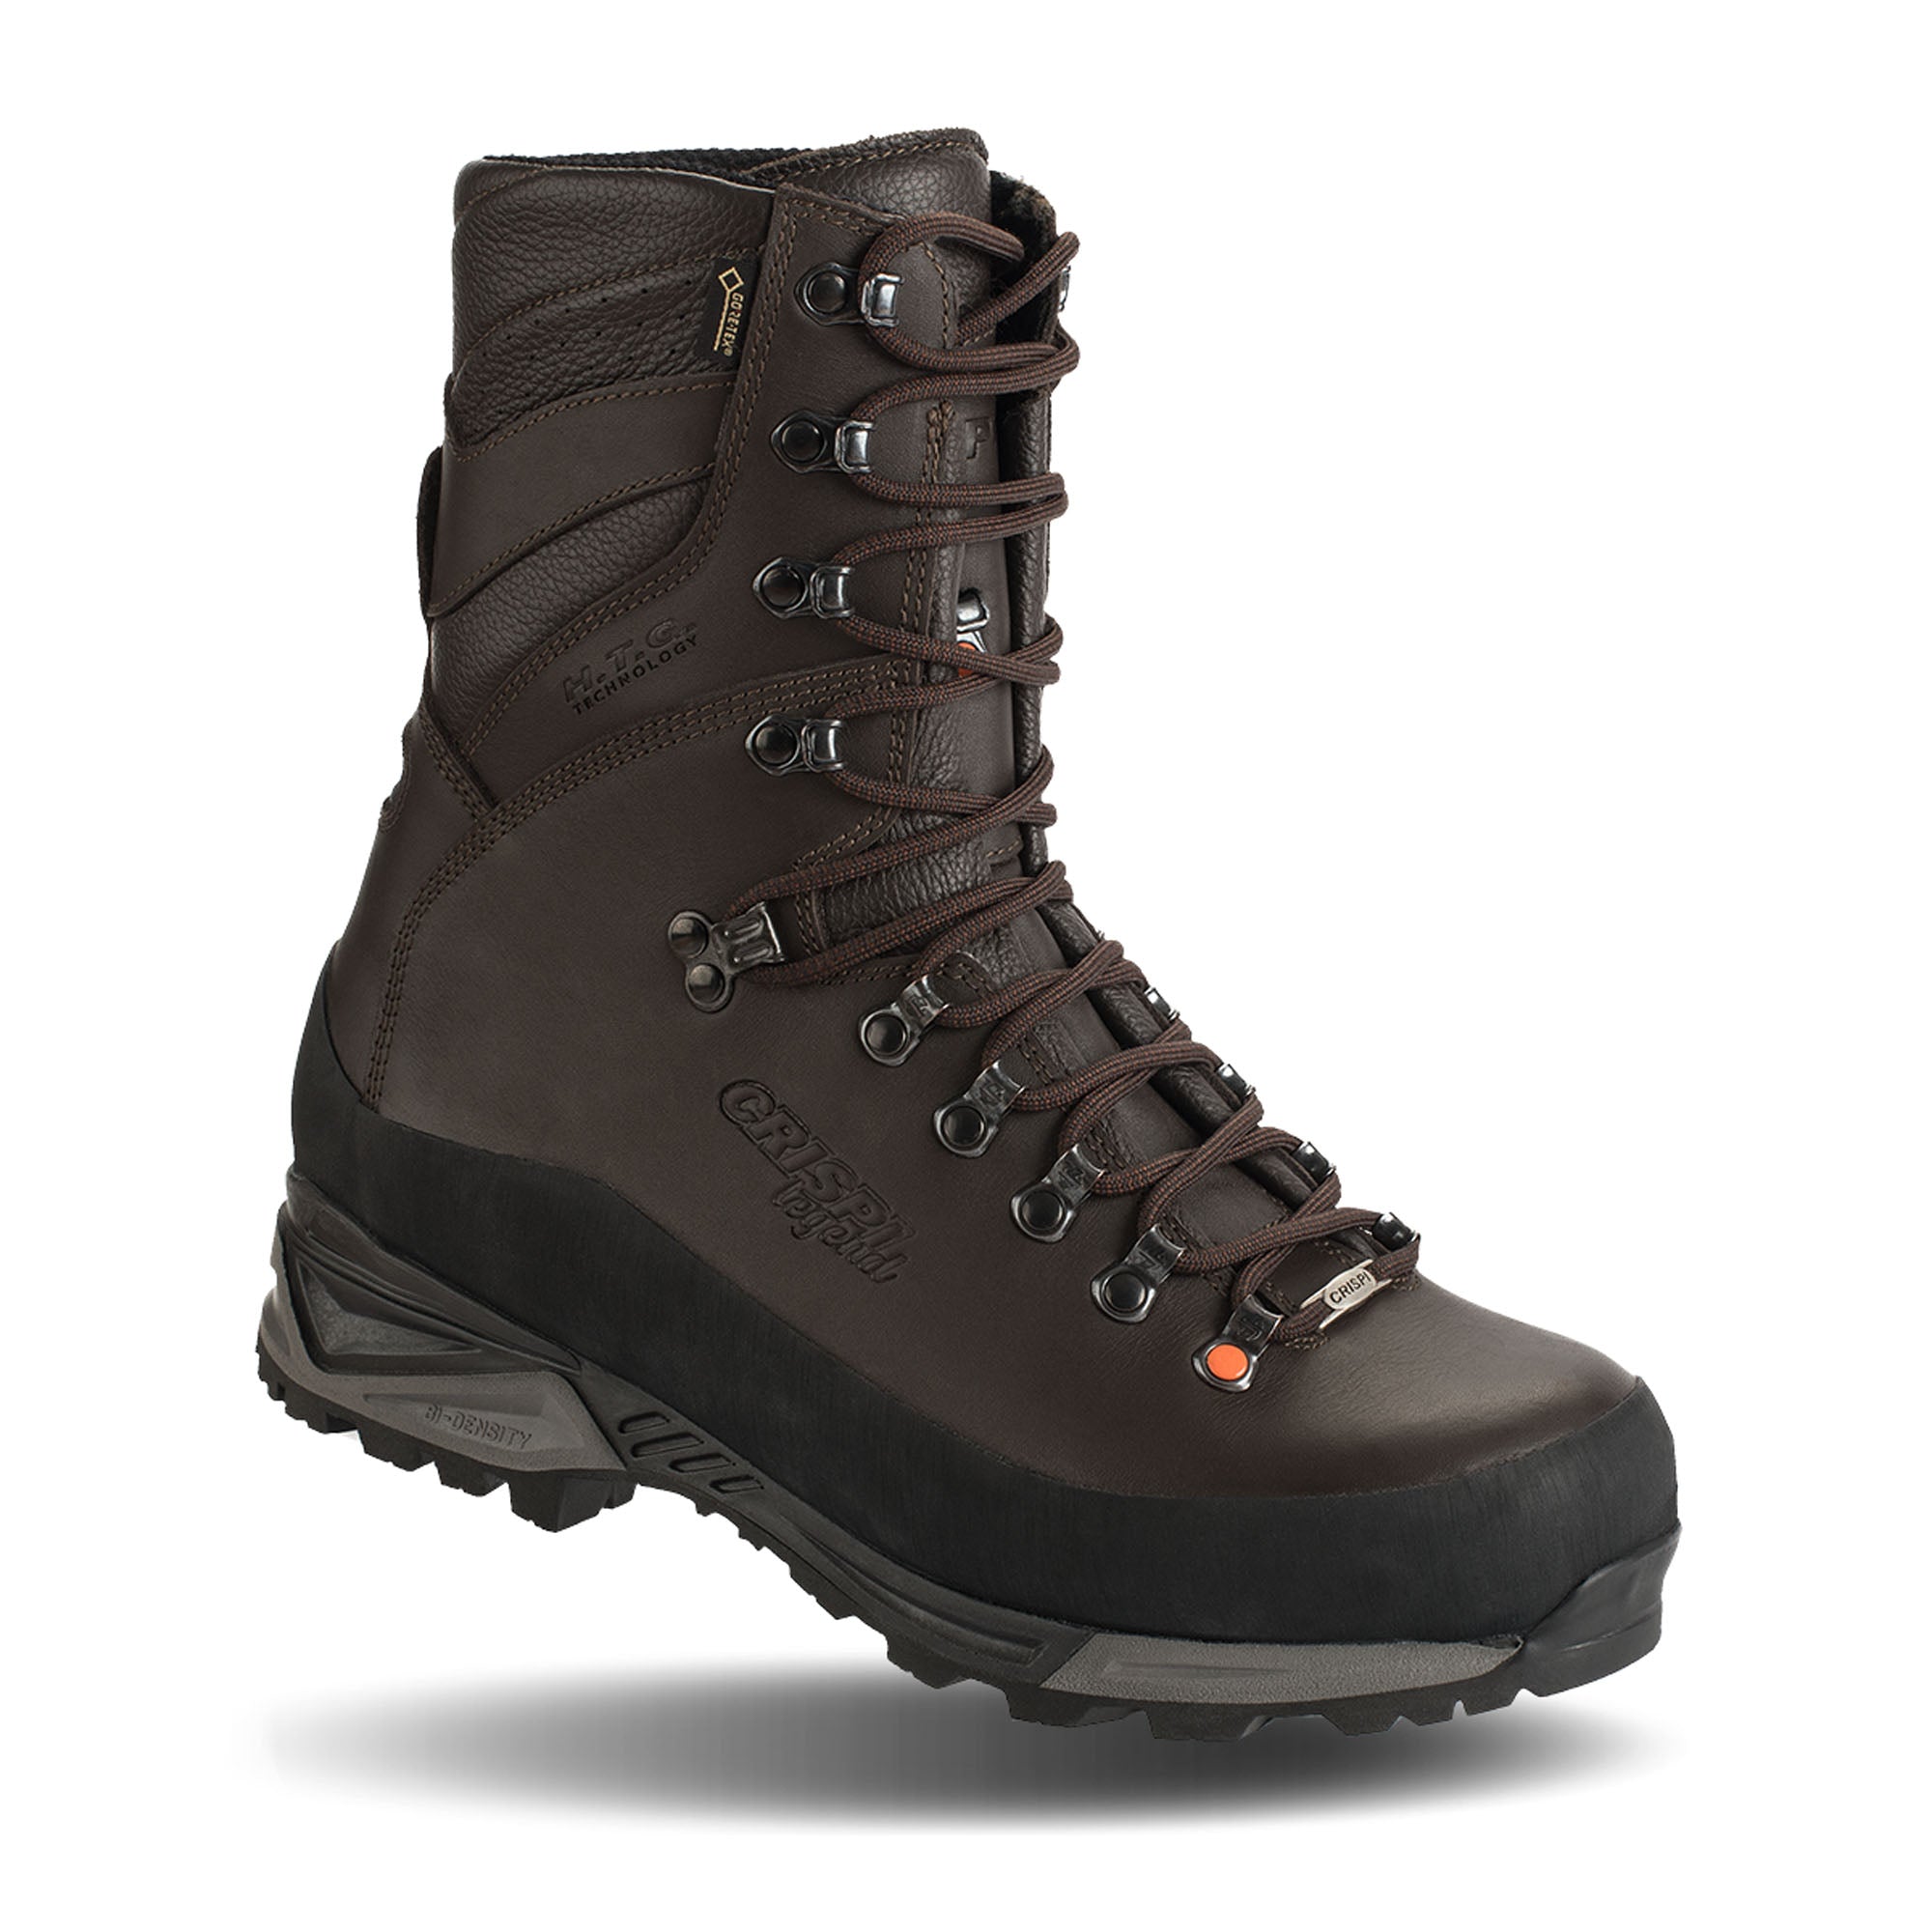 Crispi Wild Rock GTX Insulated Hunting Boots